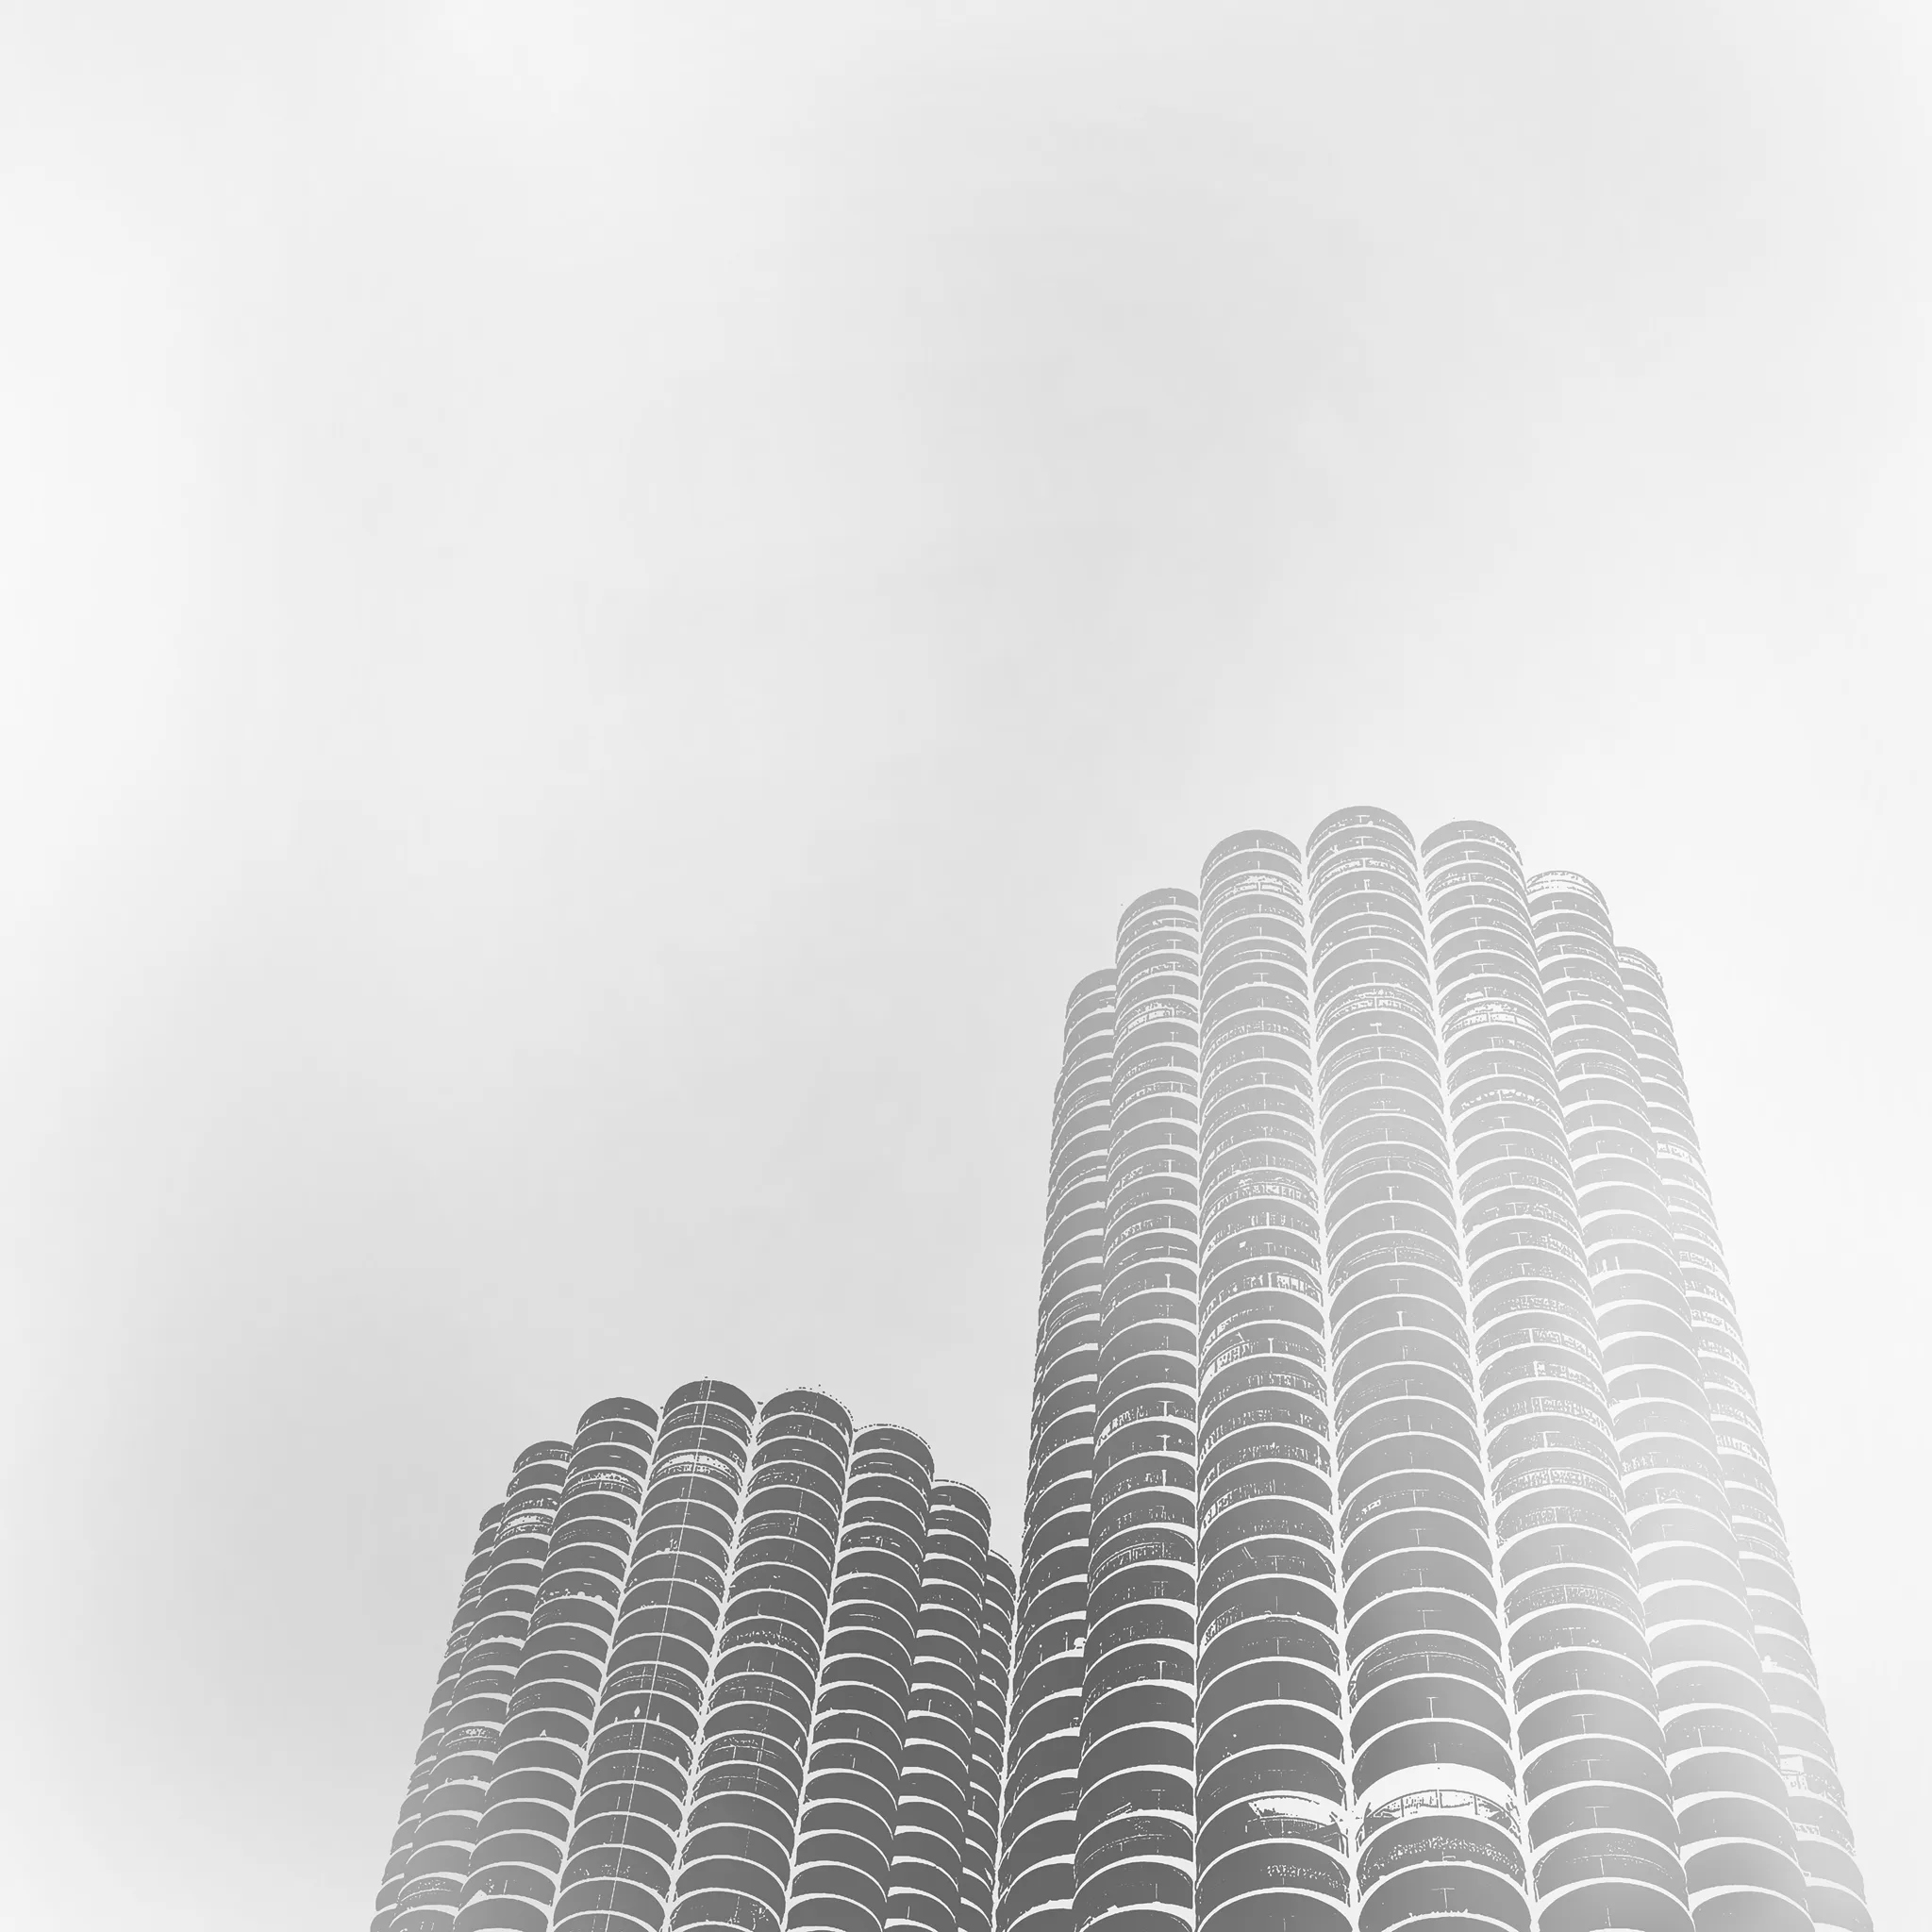 <strong>Wilco - Yankee Hotel Foxtrot</strong> (Cd)